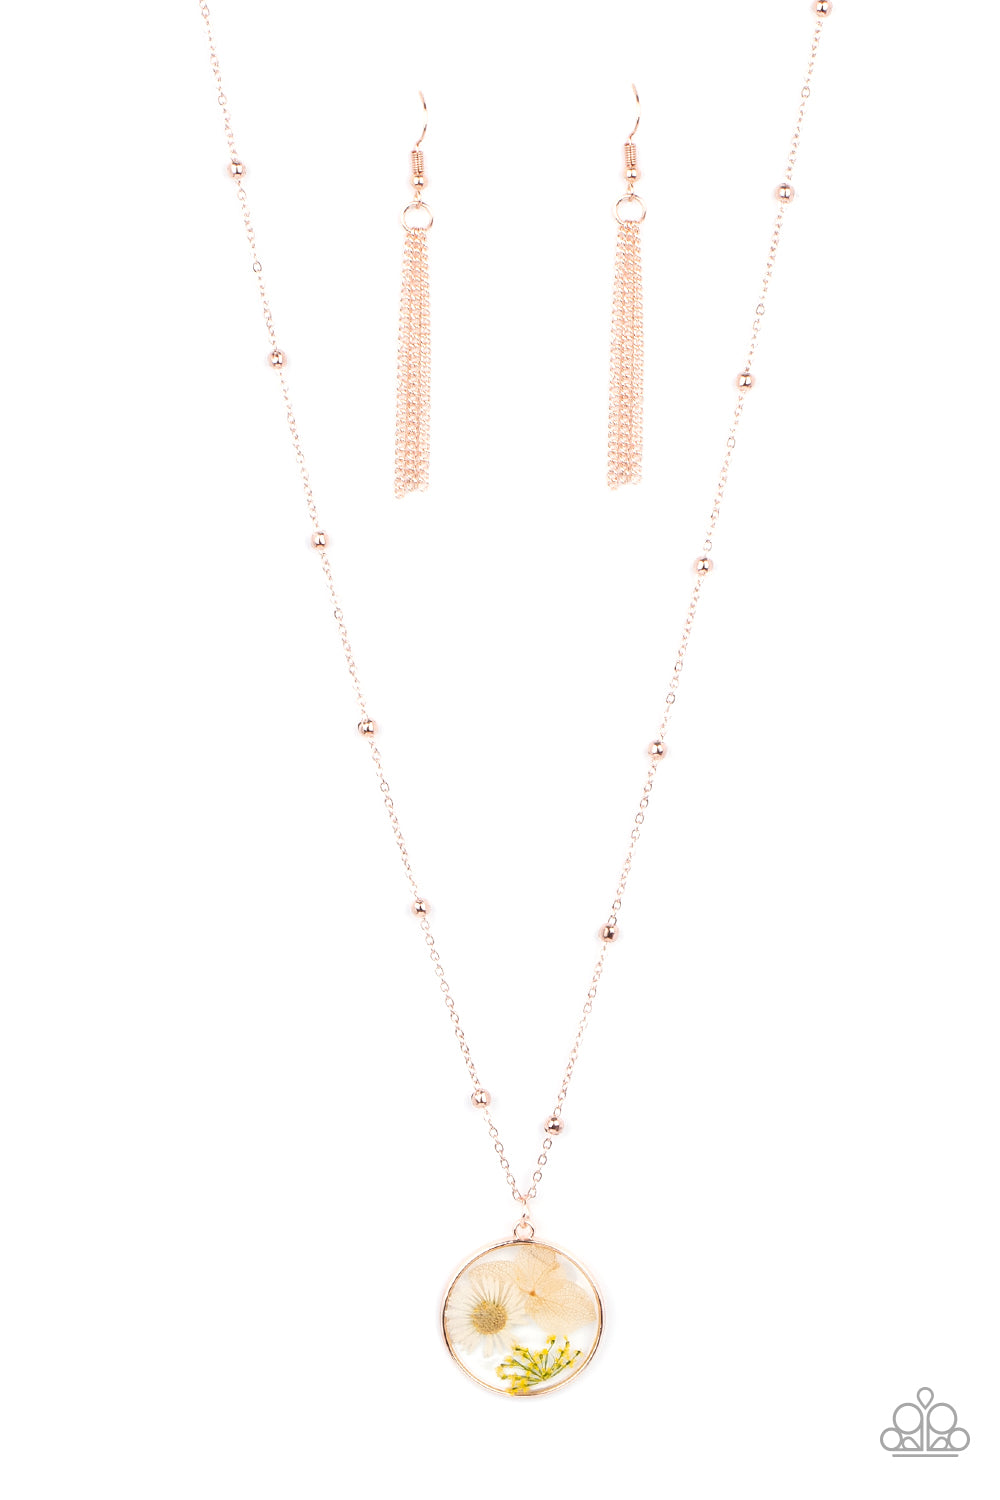 Floral Embrace Rose Gold Necklace - Paparazzi Accessories  A delightful bouquet of pressed flowers encased in a rose gold frame gently sway from a delicate rose gold chain accented with rose gold beads. Features an adjustable clasp closure.  All Paparazzi Accessories are lead free and nickel free!  Sold as one individual necklace. Includes one pair of matching earrings.